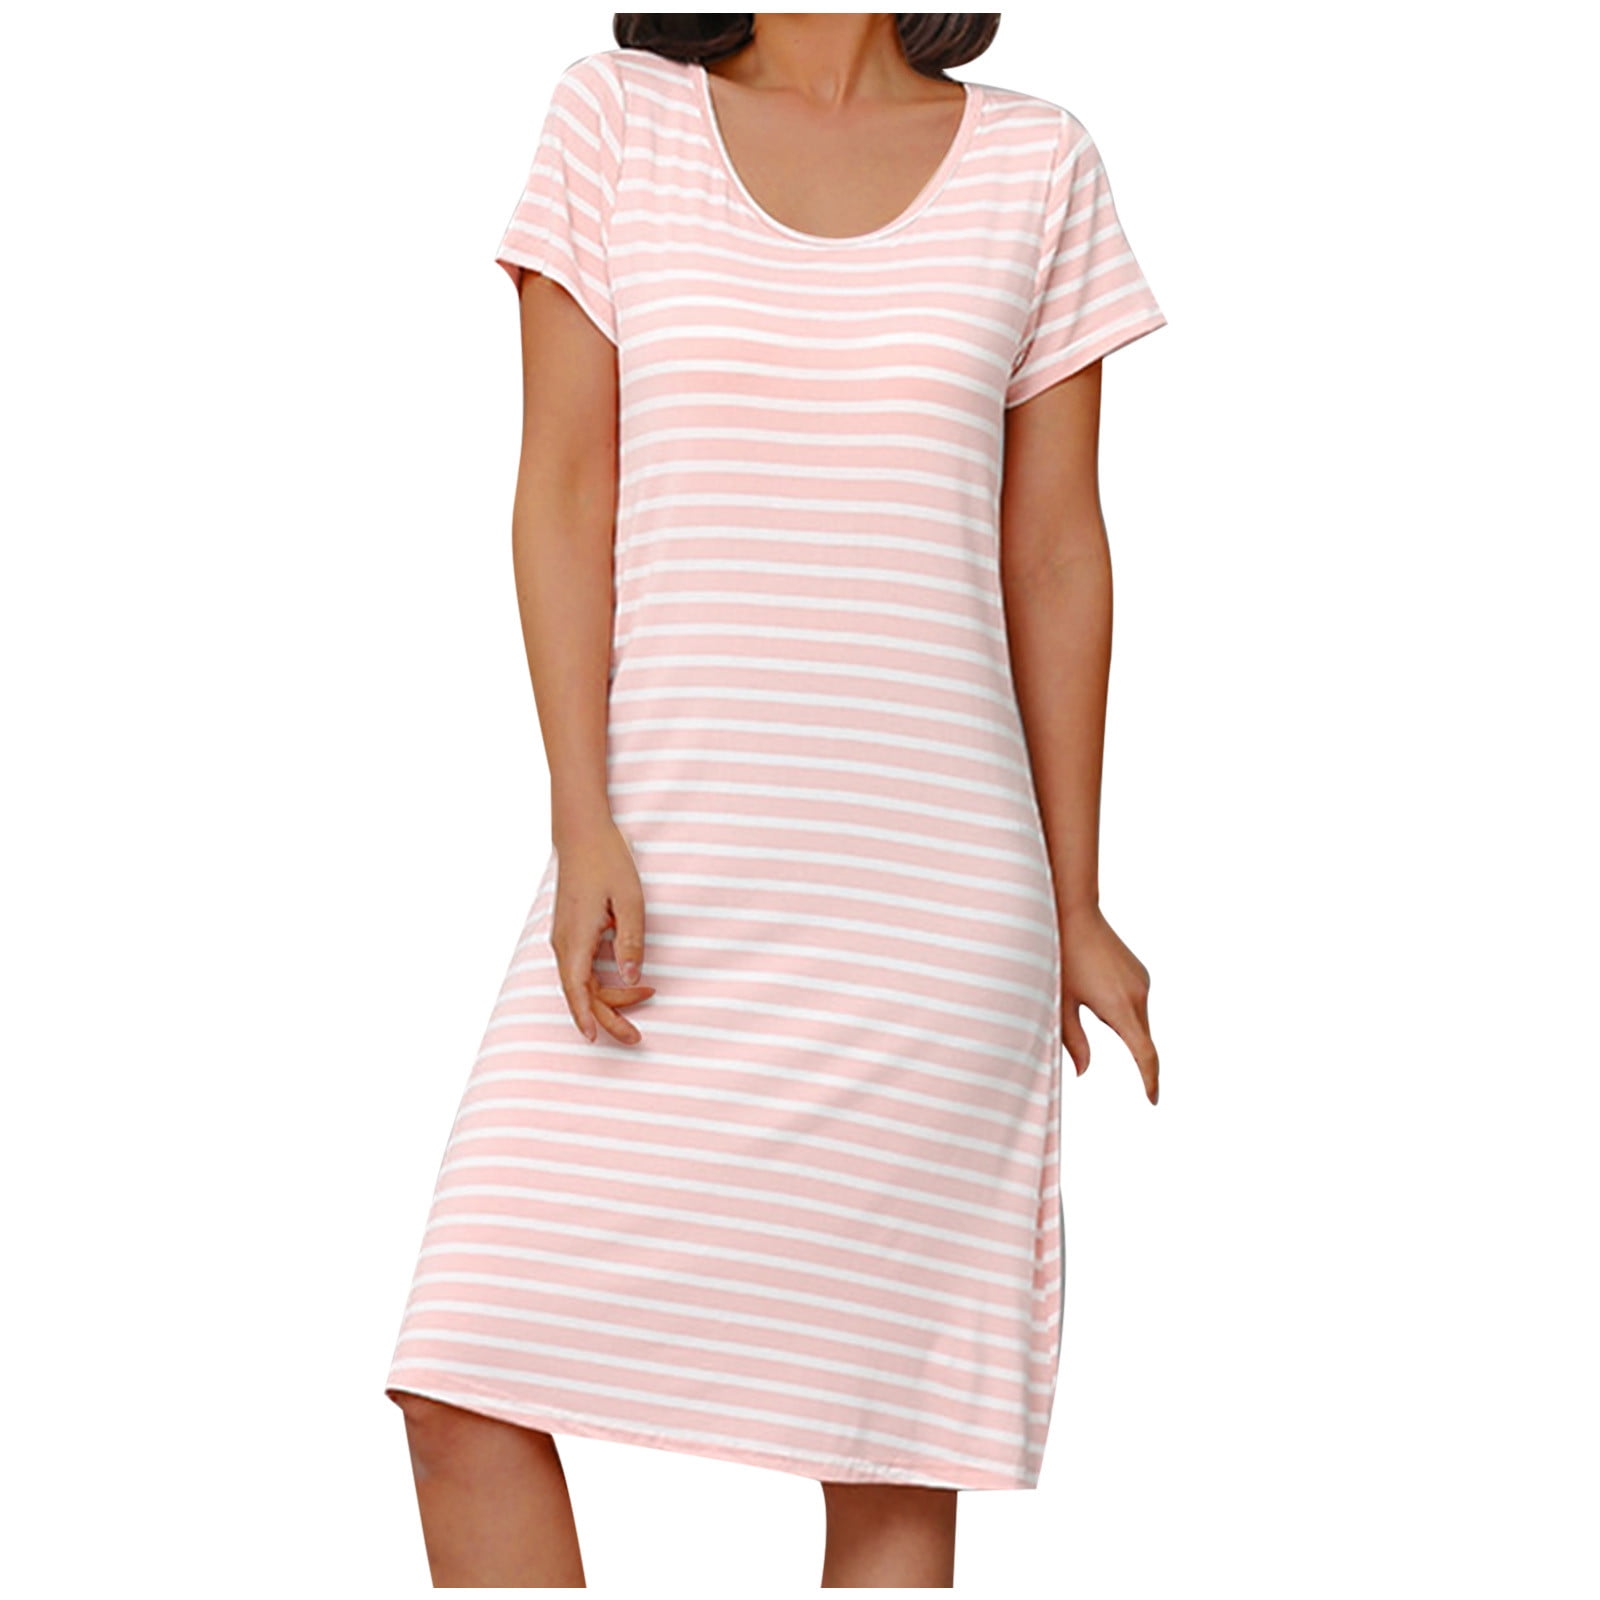 Up to 60% Off! pstuiky Plus Size Summer Dresses, Women's Round